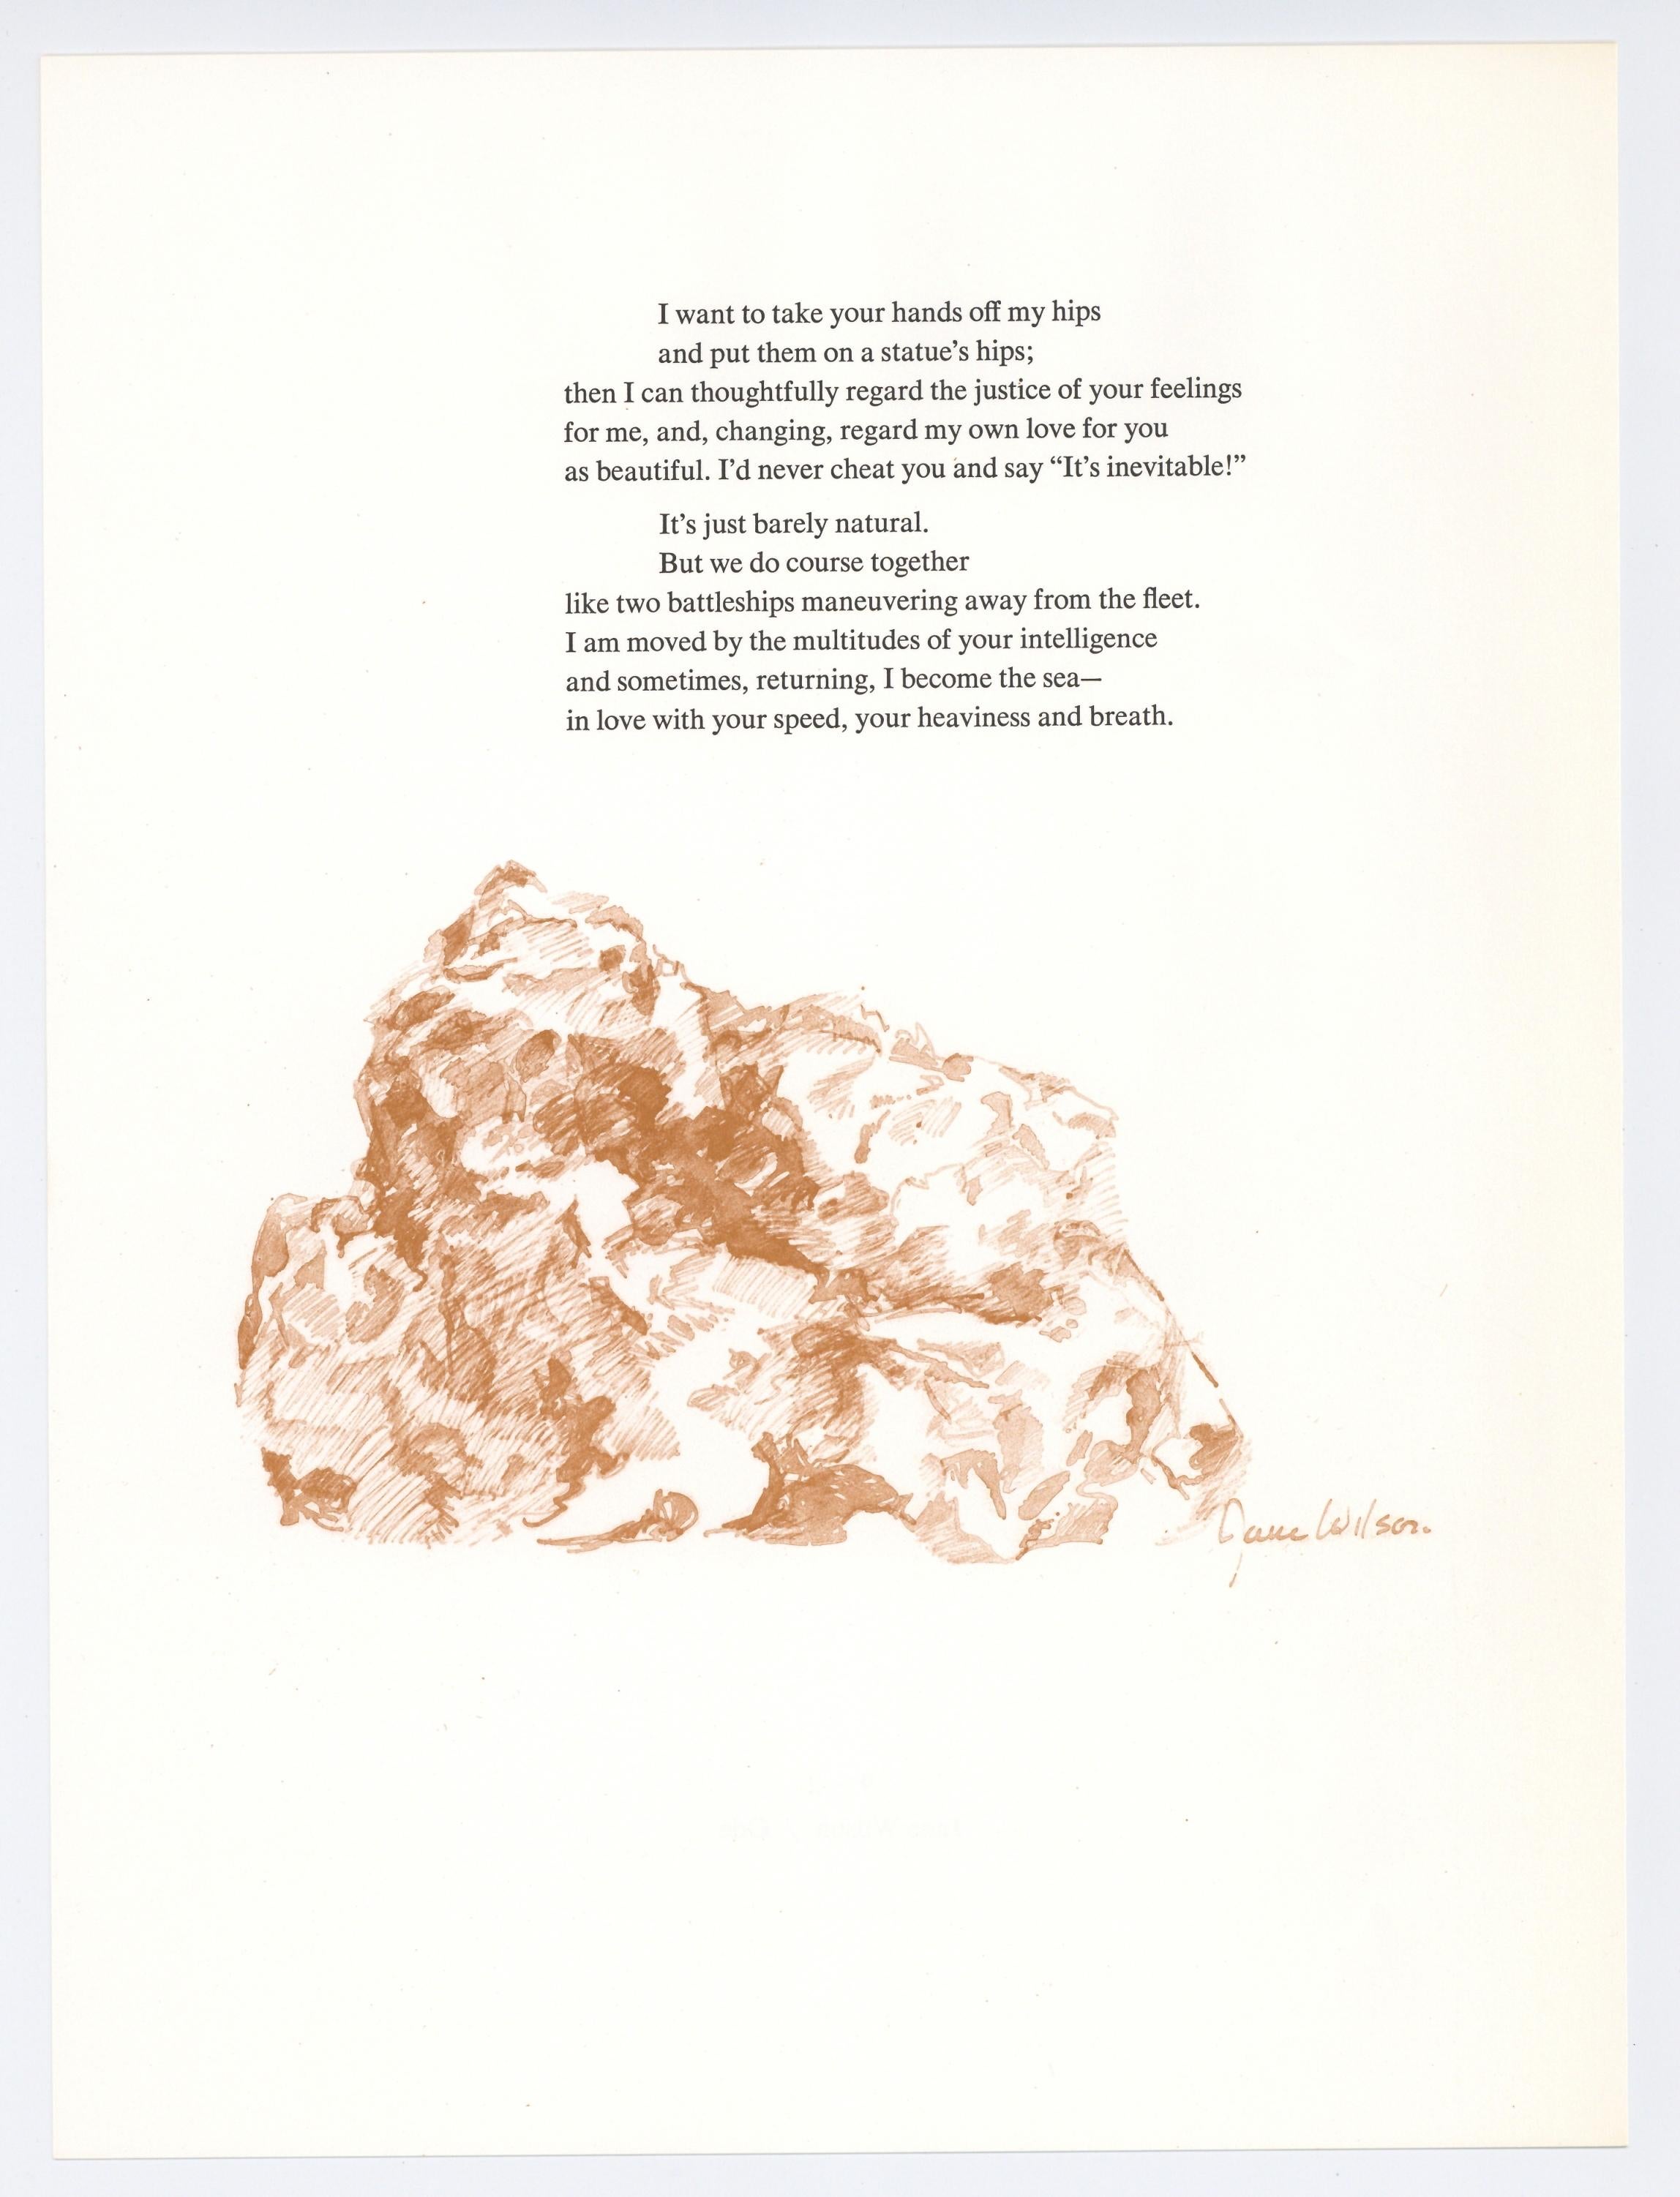 Medium: lithograph. From the "In Memory of My Feelings" portfolio, printed in 1967 on Mohawk Superfine Smooth paper in a limited edition of 2500 and published in New York by The Museum of Modern Art. Signed in the plate (not by hand). 

Jane Wilson